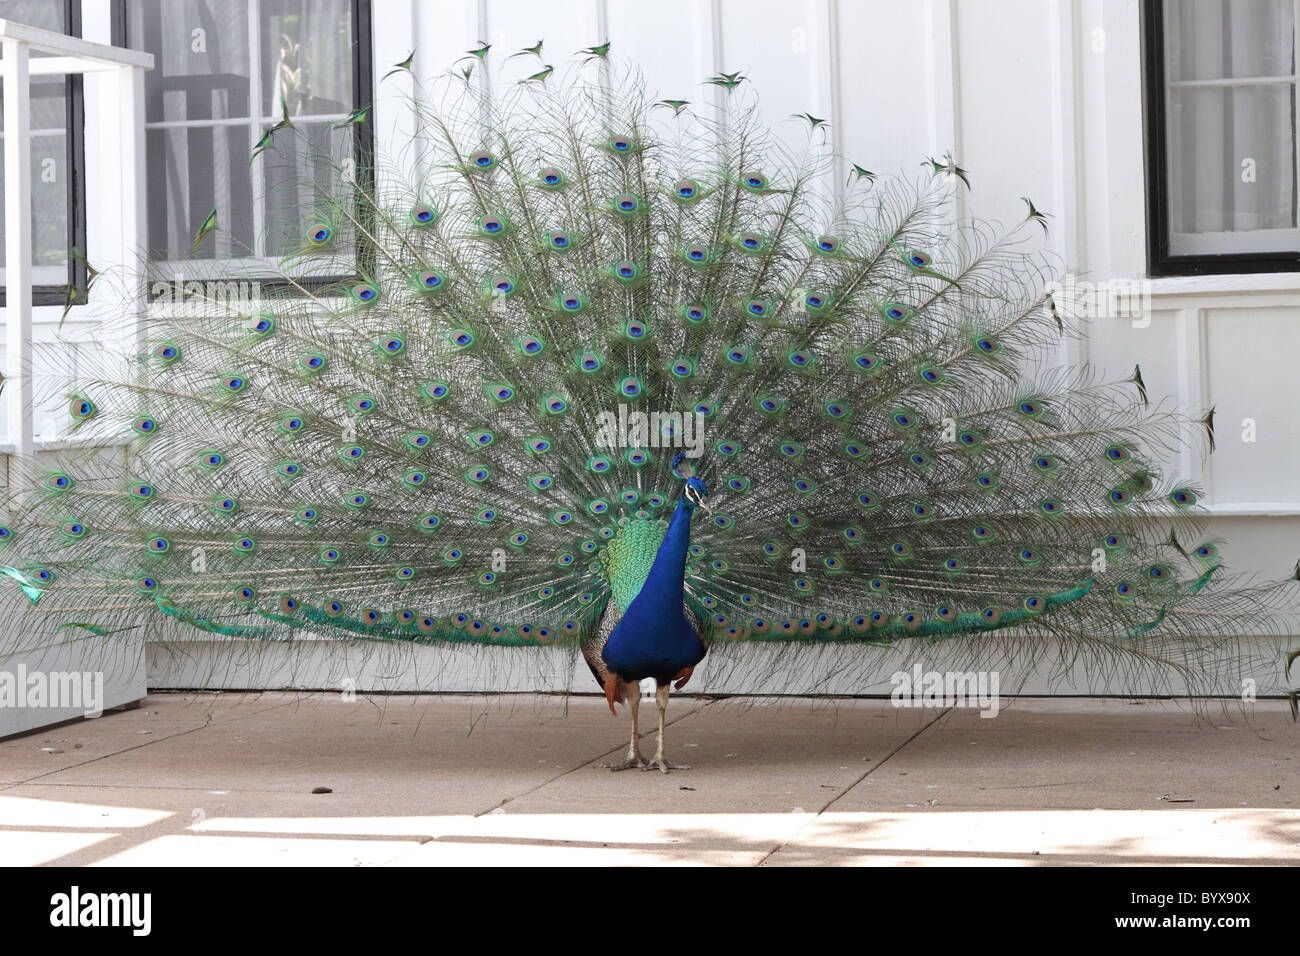 Peacock against white house at Mayfield Park in Austin, Texas Stock Photo